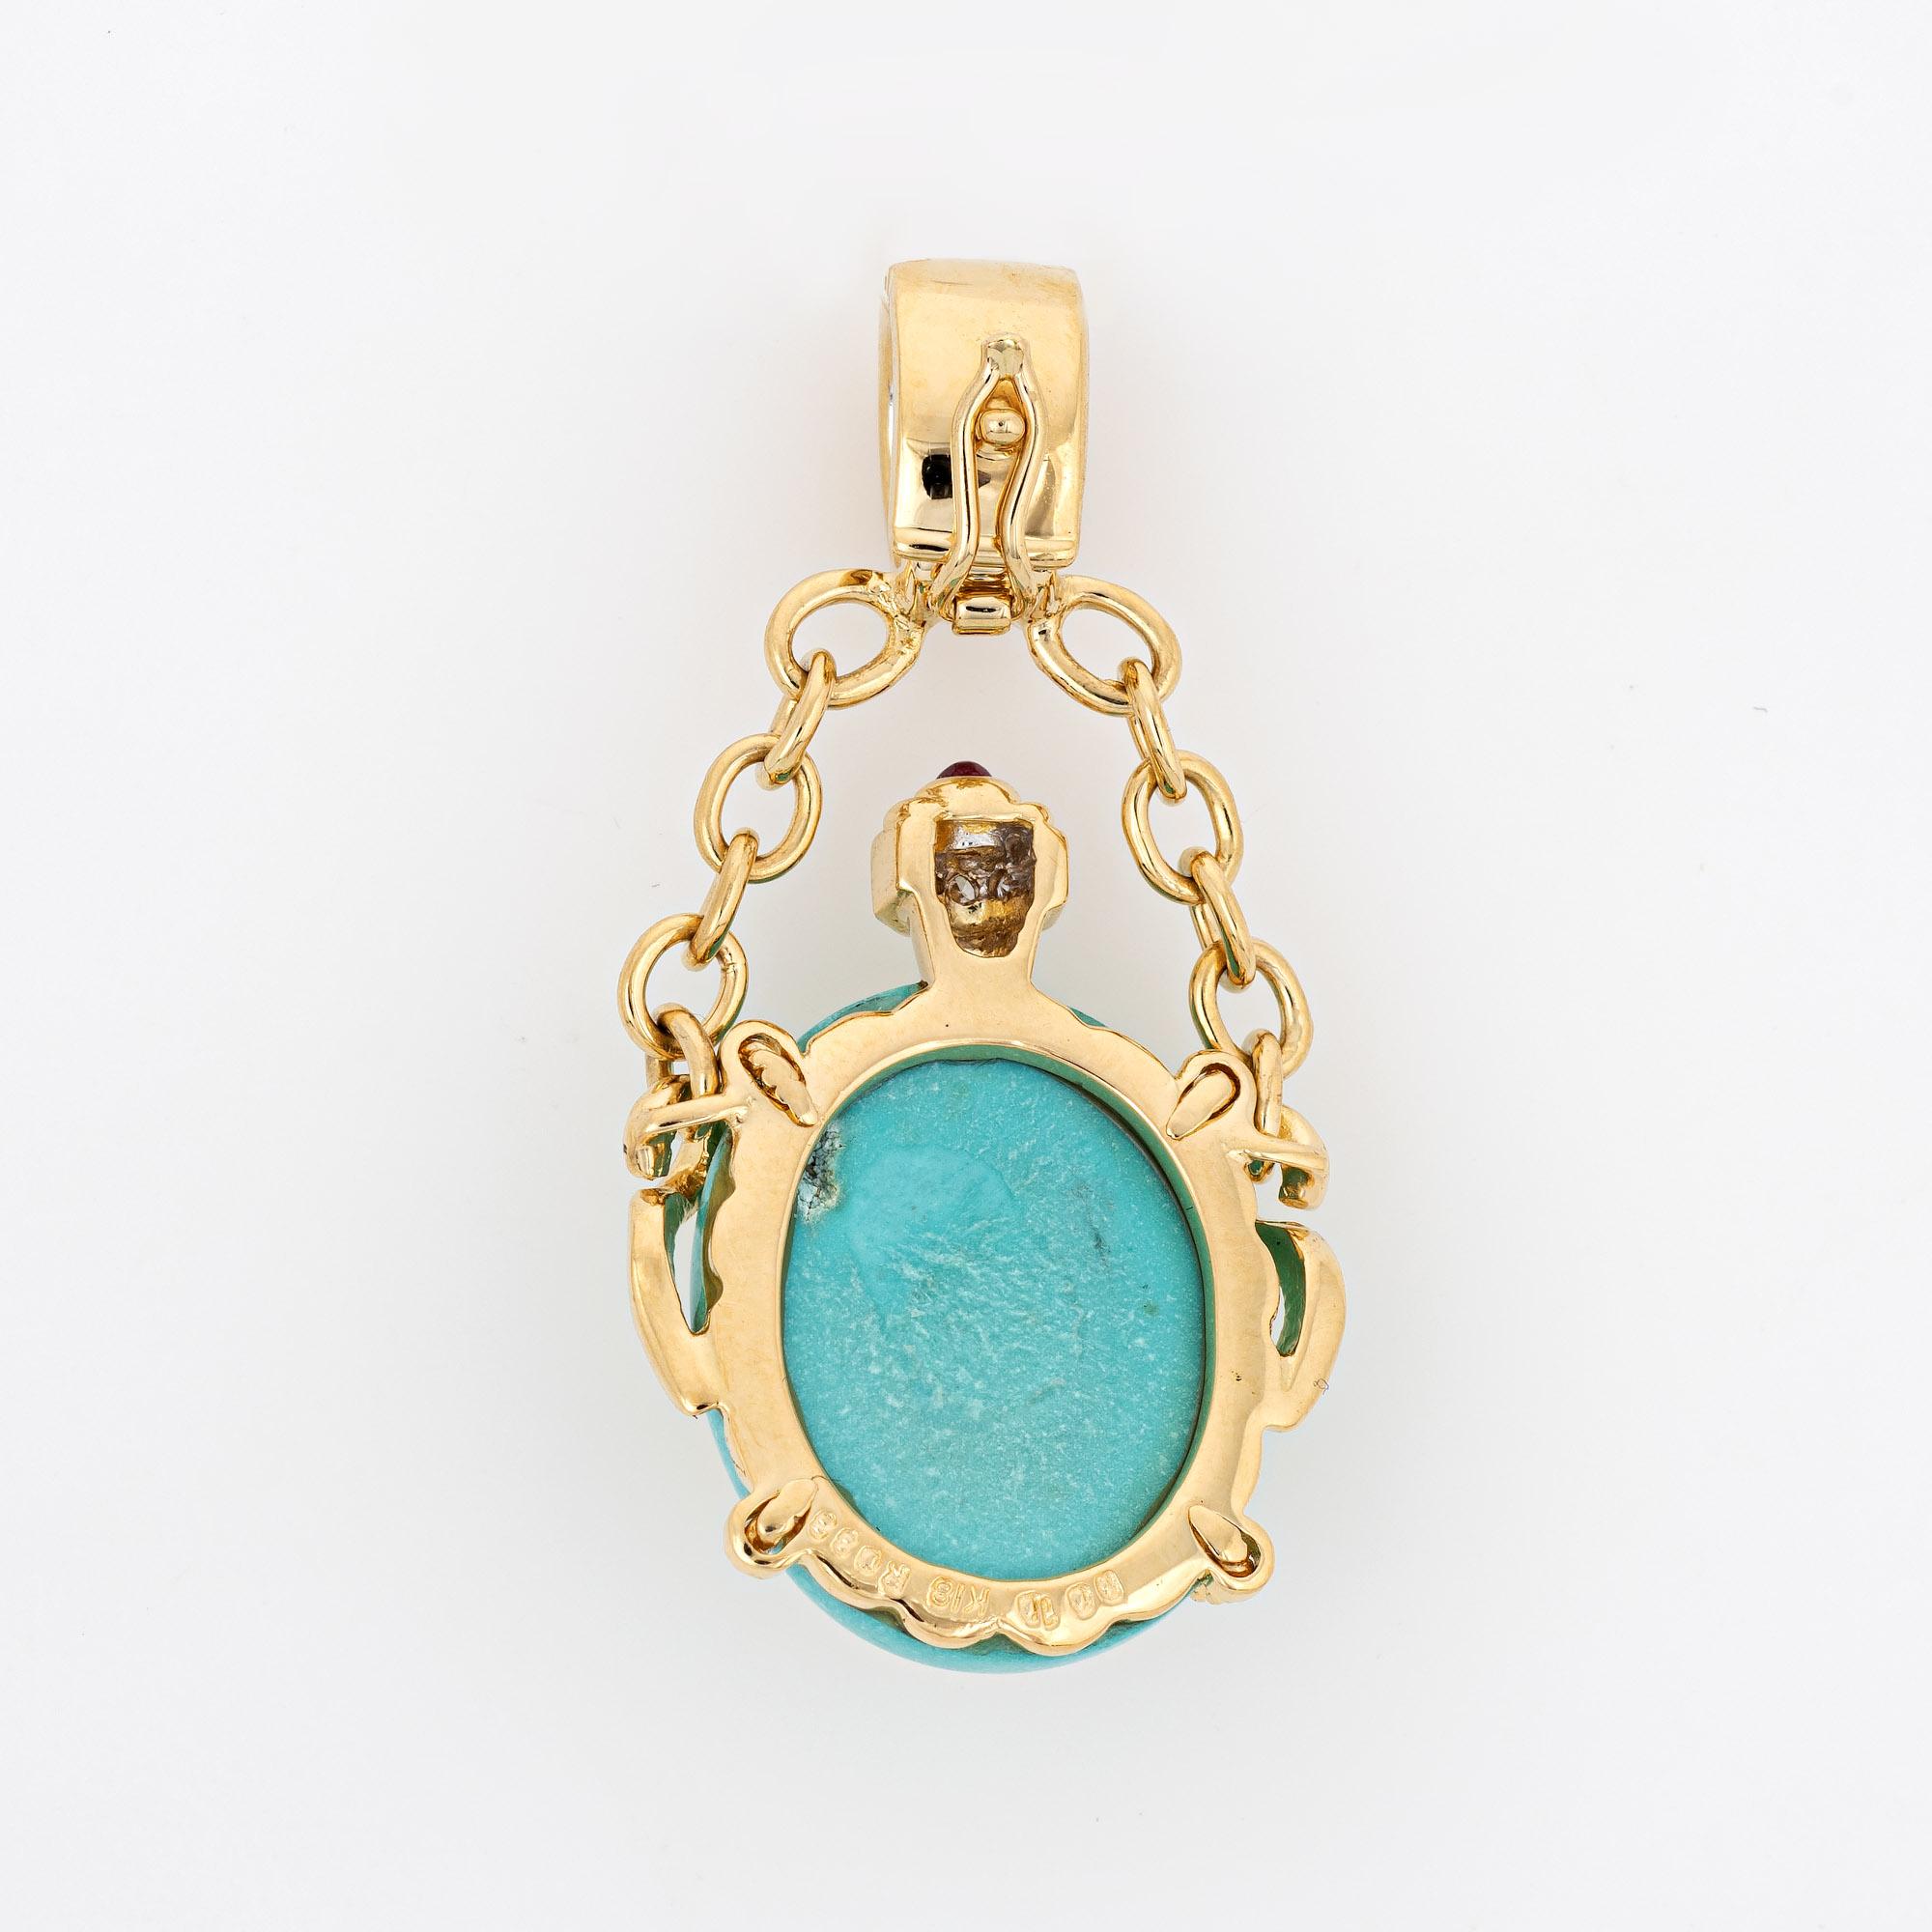 Finely detailed turquoise, ruby & diamond bottle pendant crafted in 18k yellow gold.  

Diamonds total an estimated 0.10 carats (estimated at H-I color and SI1-I1 clarity). Cabochon cut rubies total an estimated 0.33 carats. Turquoise measures 19mm